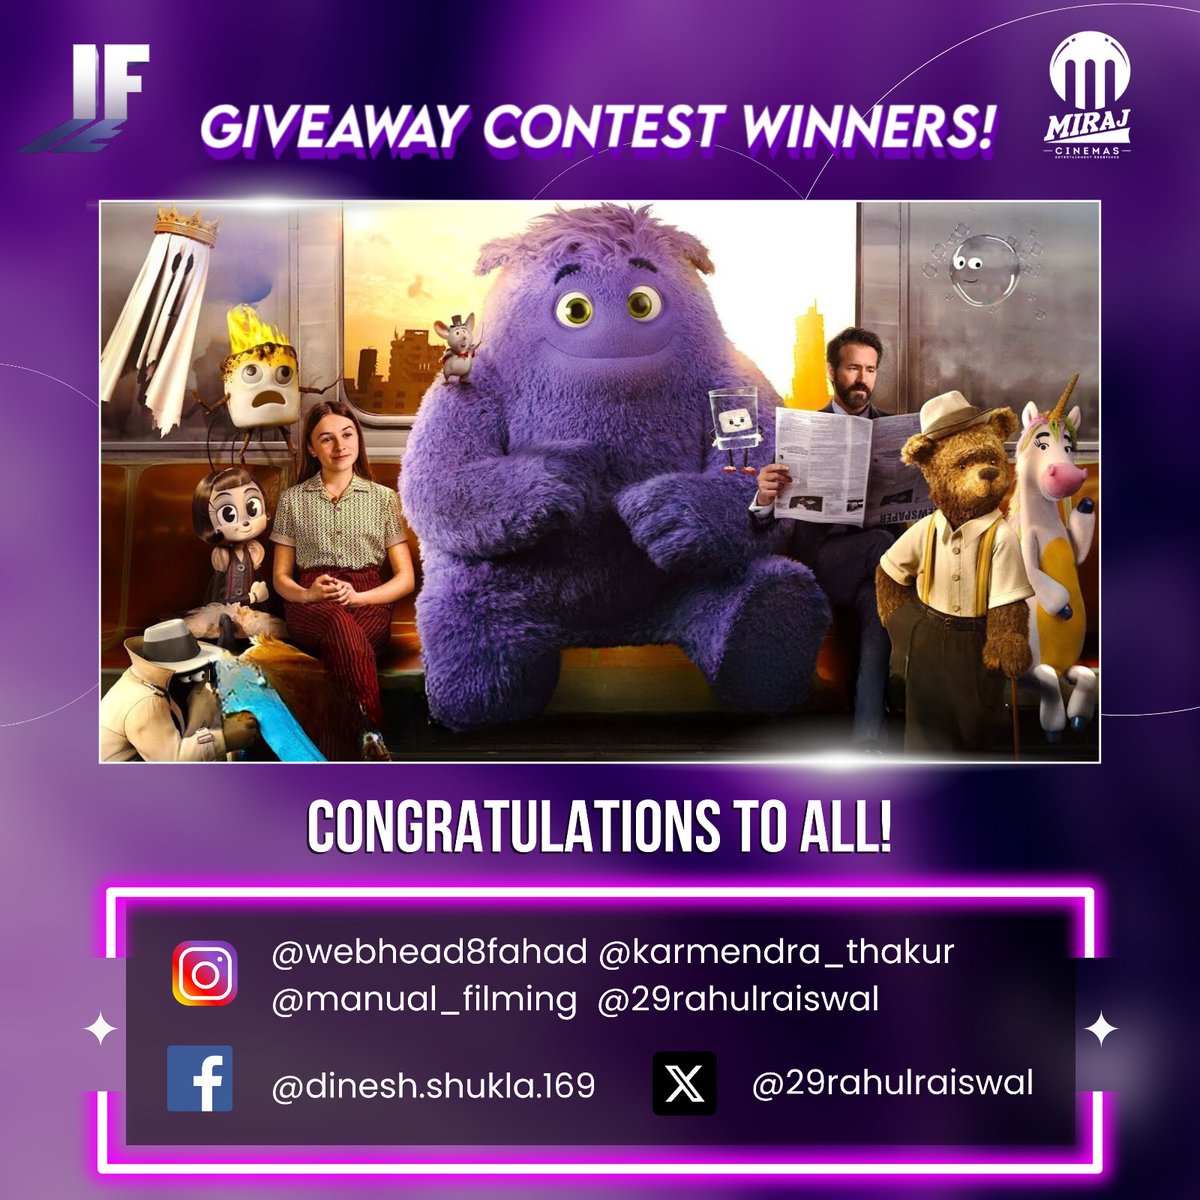 🎉 Congratulations to all our amazing #IF Contest winners! You have won an exclusive movie merchandise from the #IF team.Kindly DM us your contact & address details to claim your gift.Thank you to everyone who participated! Stay tuned for more exciting contests and fun